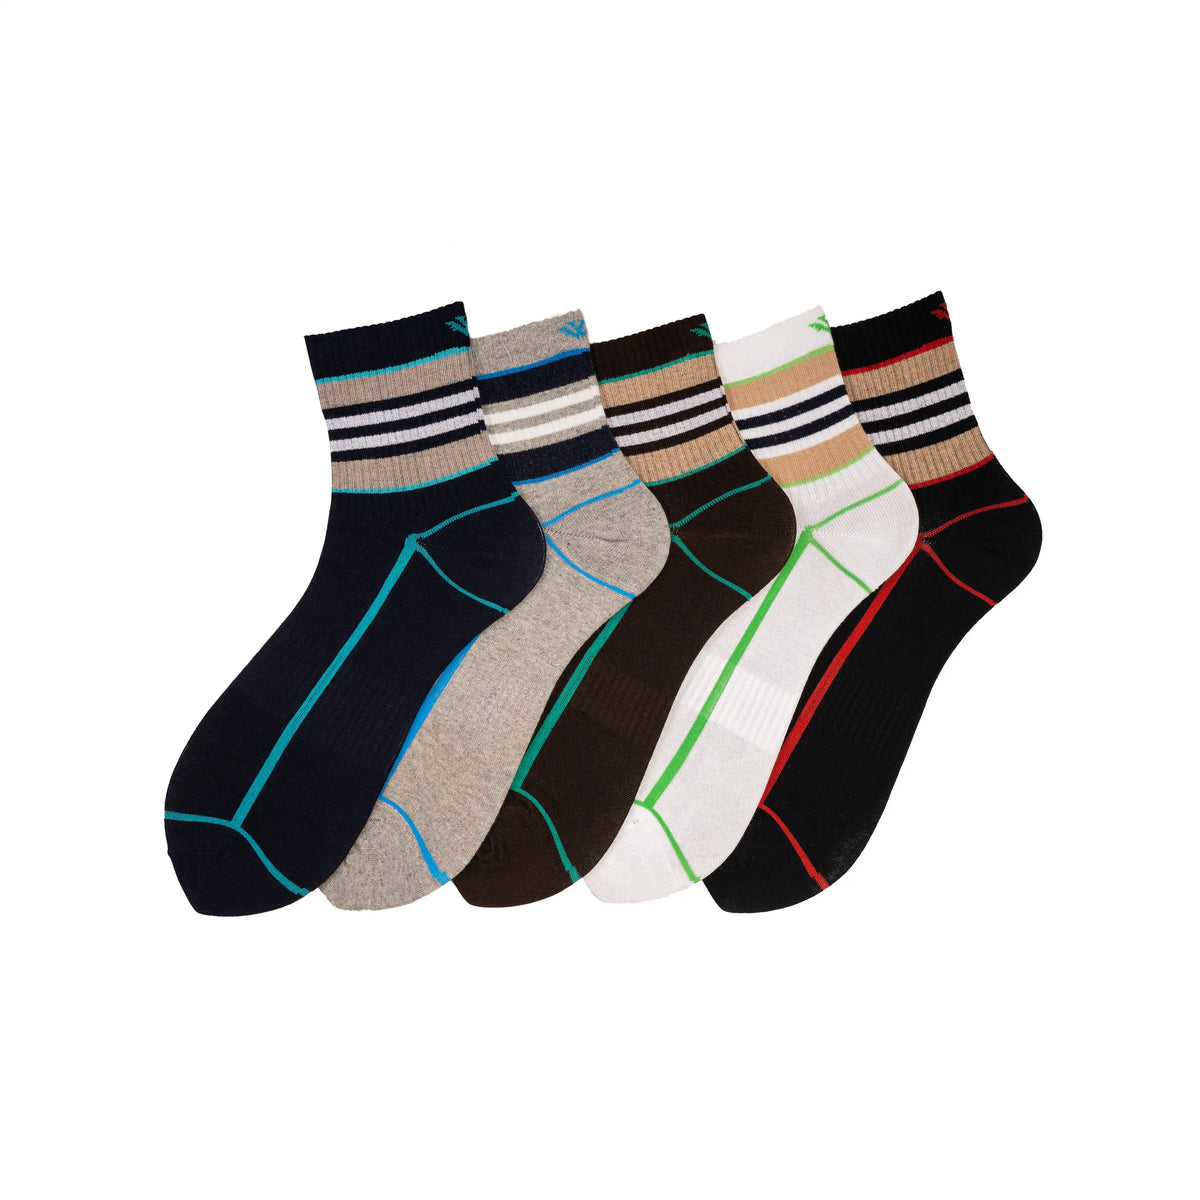 Young Wings Men's Multi Colour Cotton Fabric Design Ankle Length Socks - Pack of 5, Style no. M1-2114 N